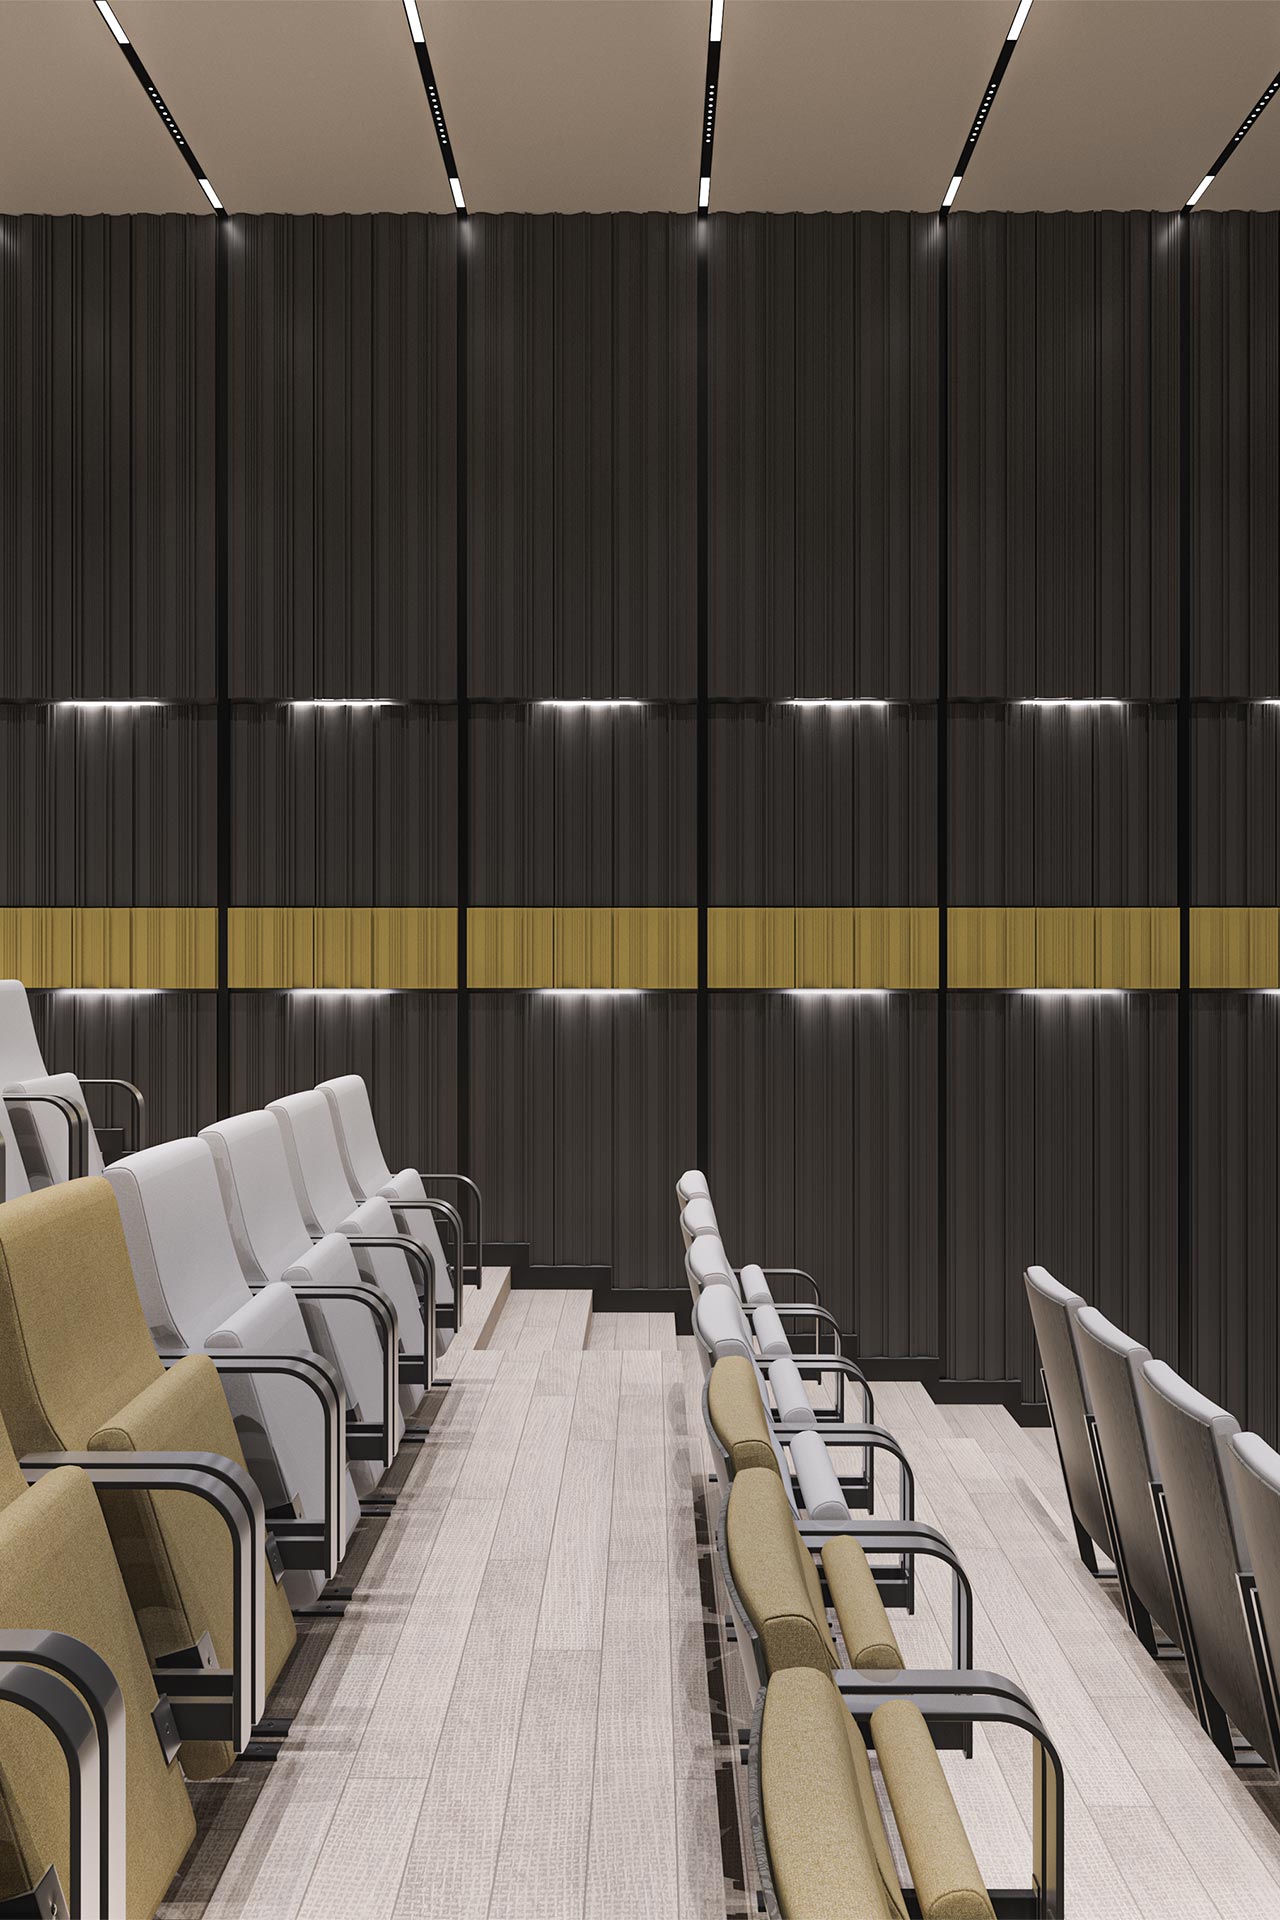 Sound diffuser system on the wall in the cinema hall